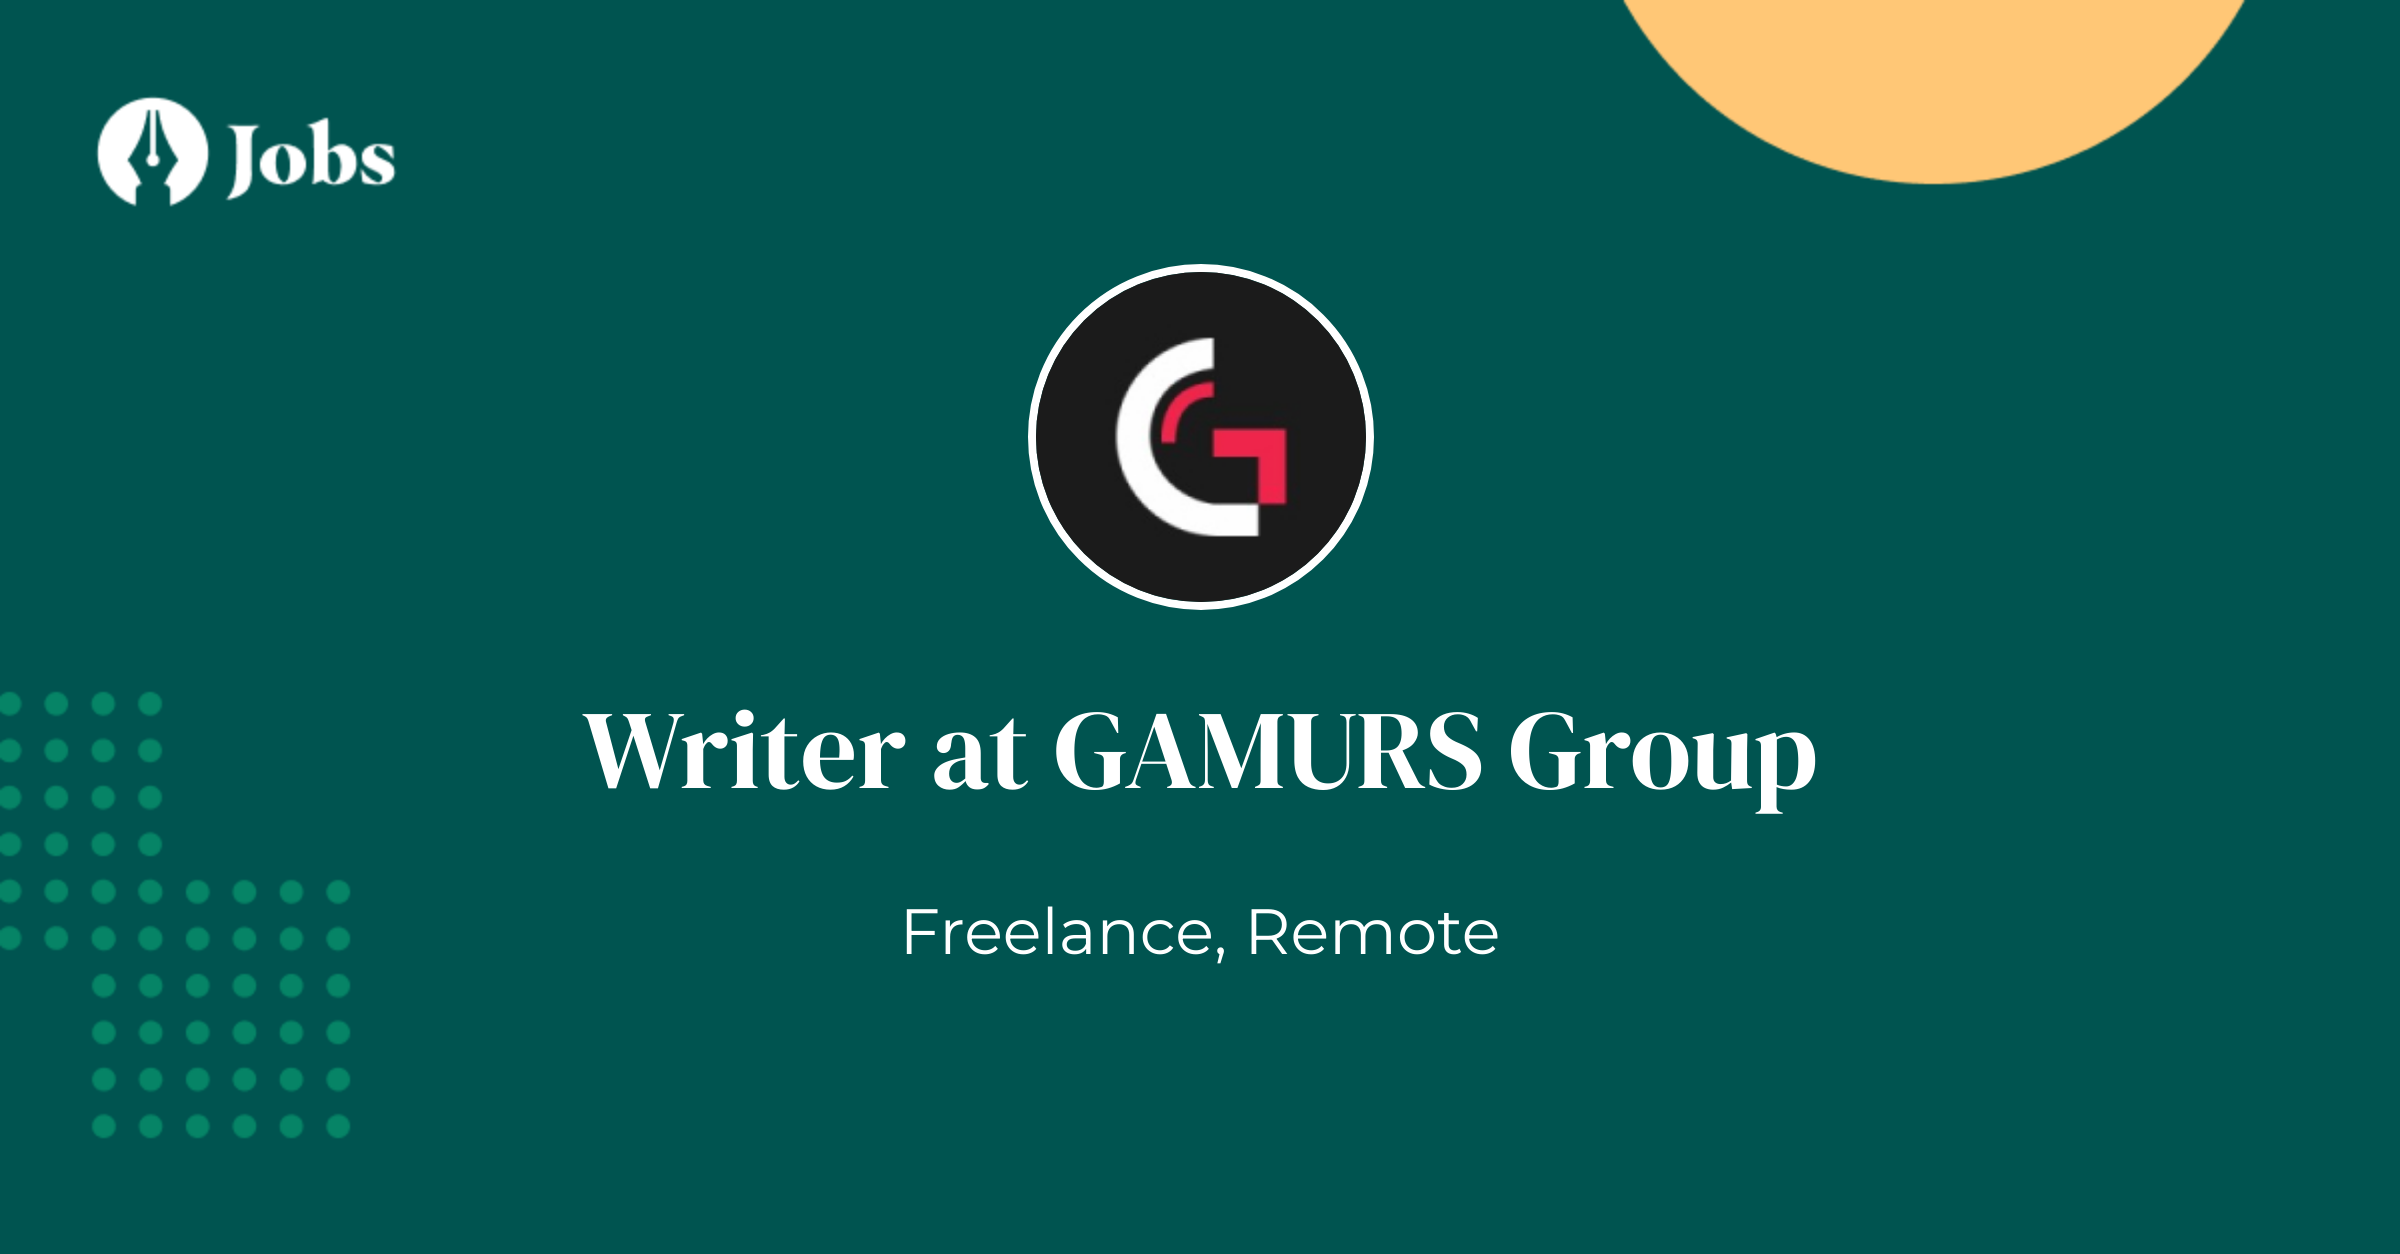 Entry-level Freelance Writers Needed at GAMURS Group ($25/hr)